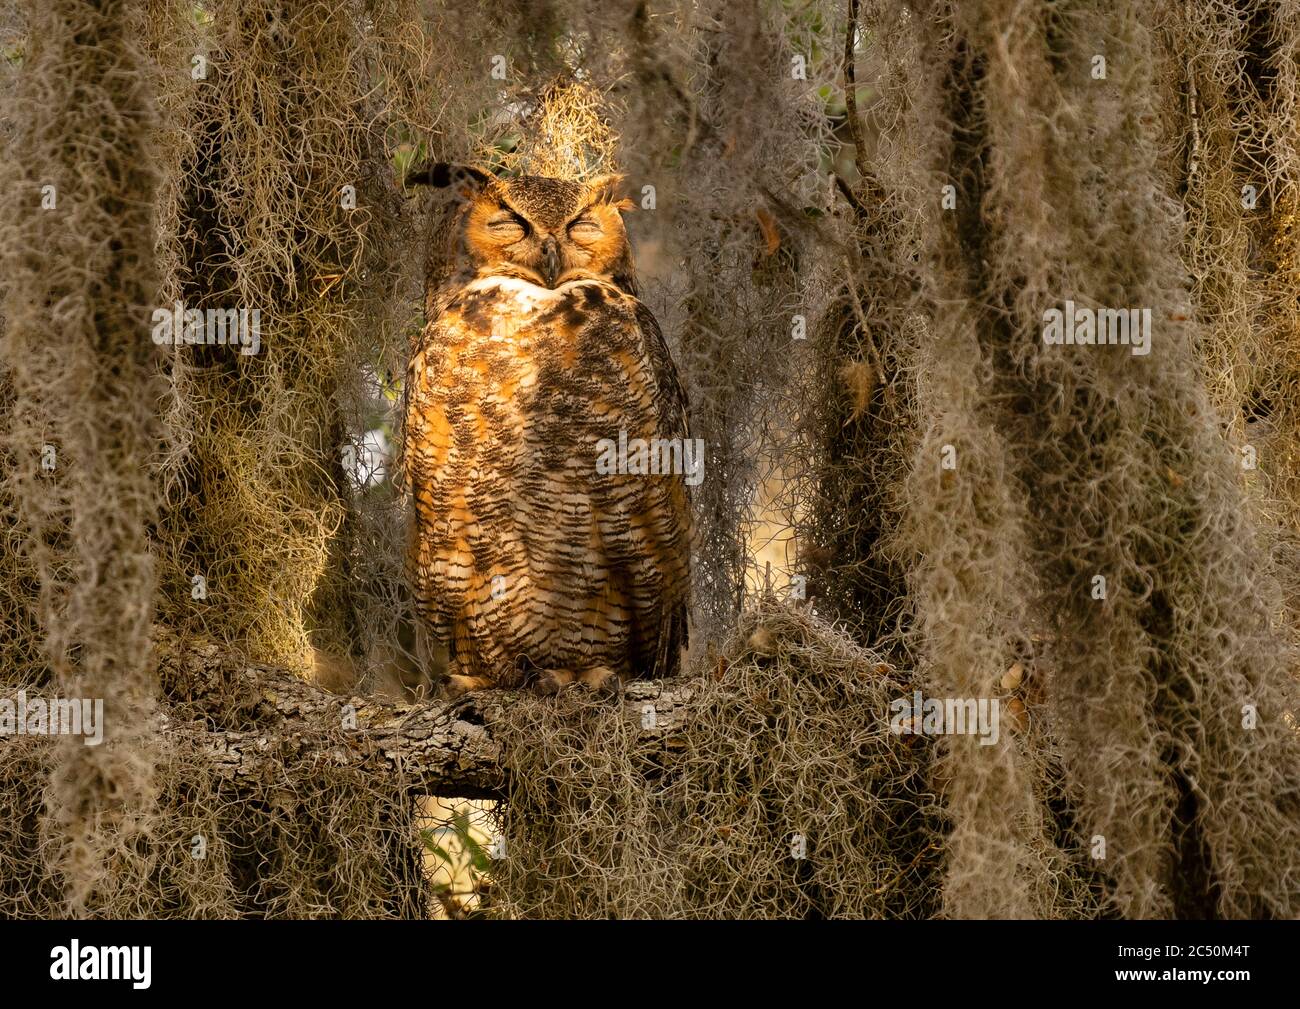 Great Horned Owl Sleeping in Tree Covered With Spanish Moss Stock Photo